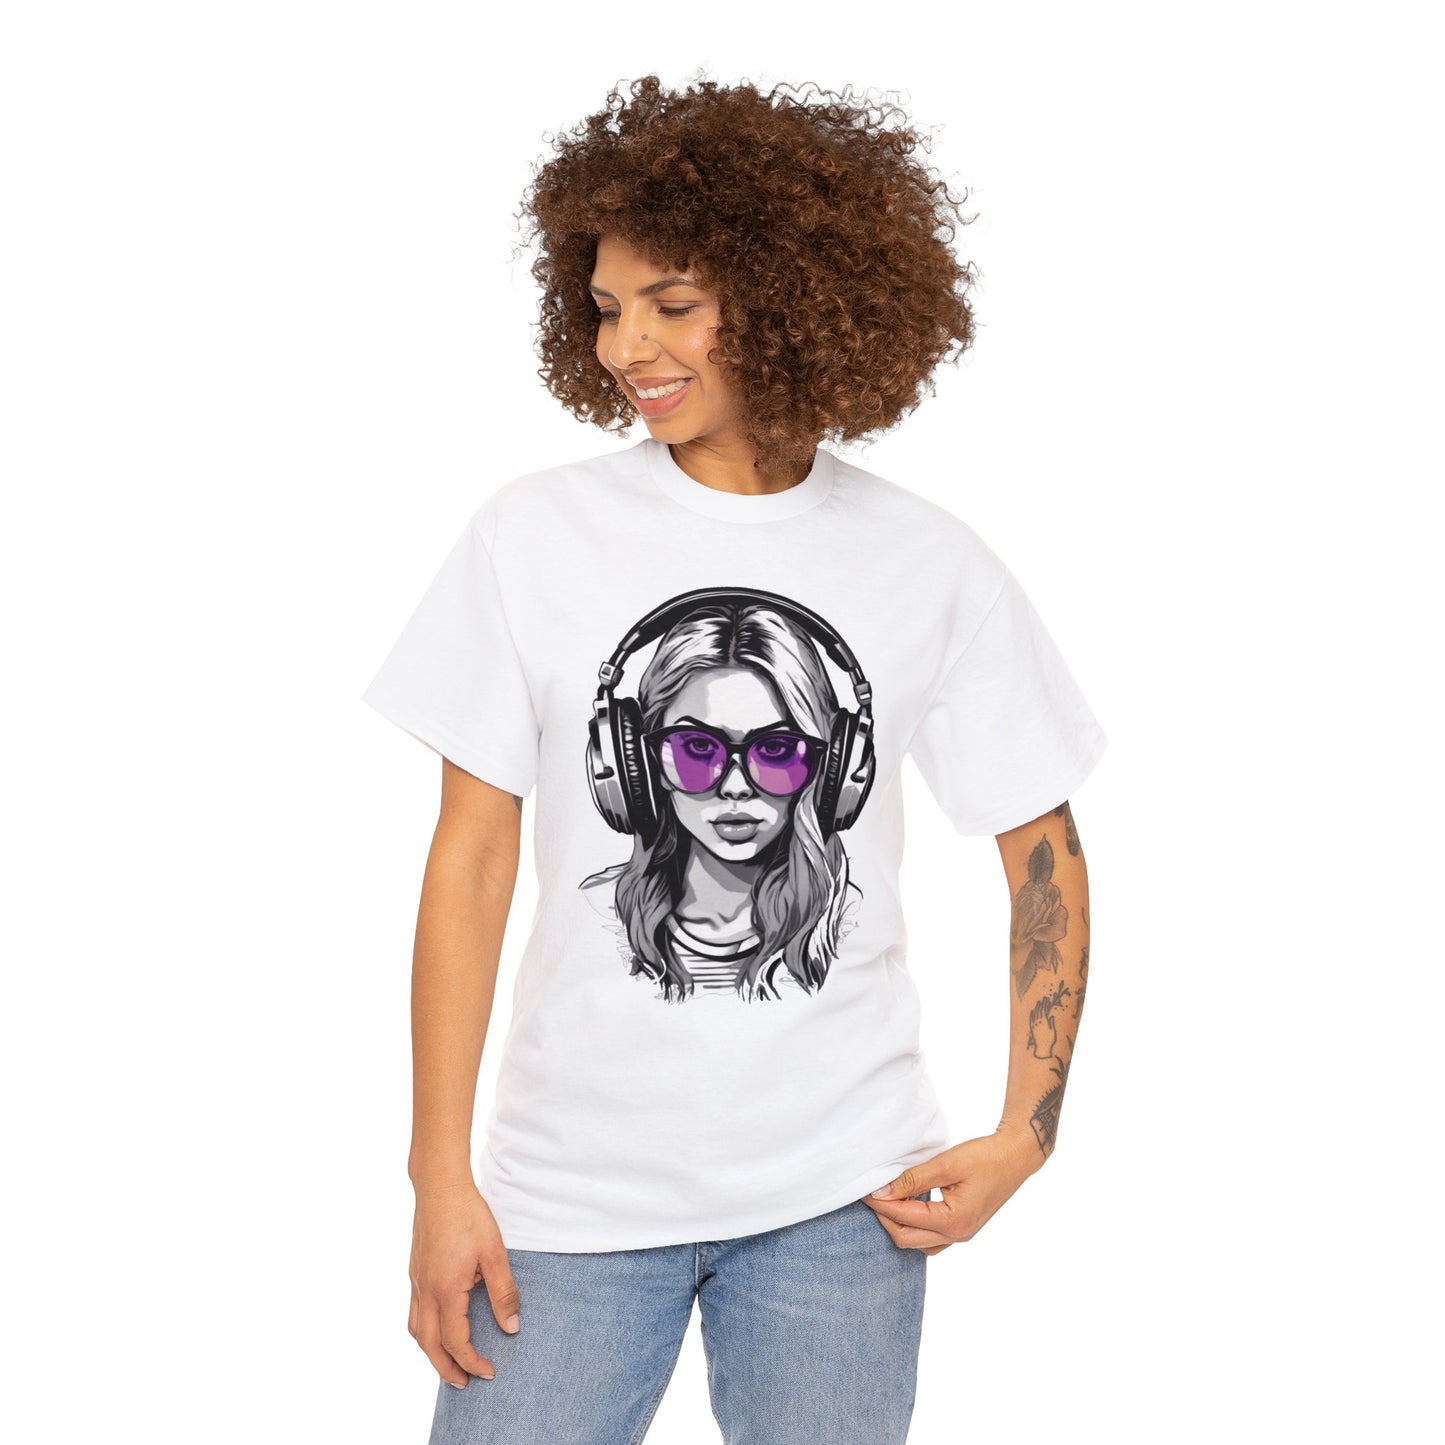 Girl Power T-Shirt: Rock Your Style with Headphones and Sunglasses